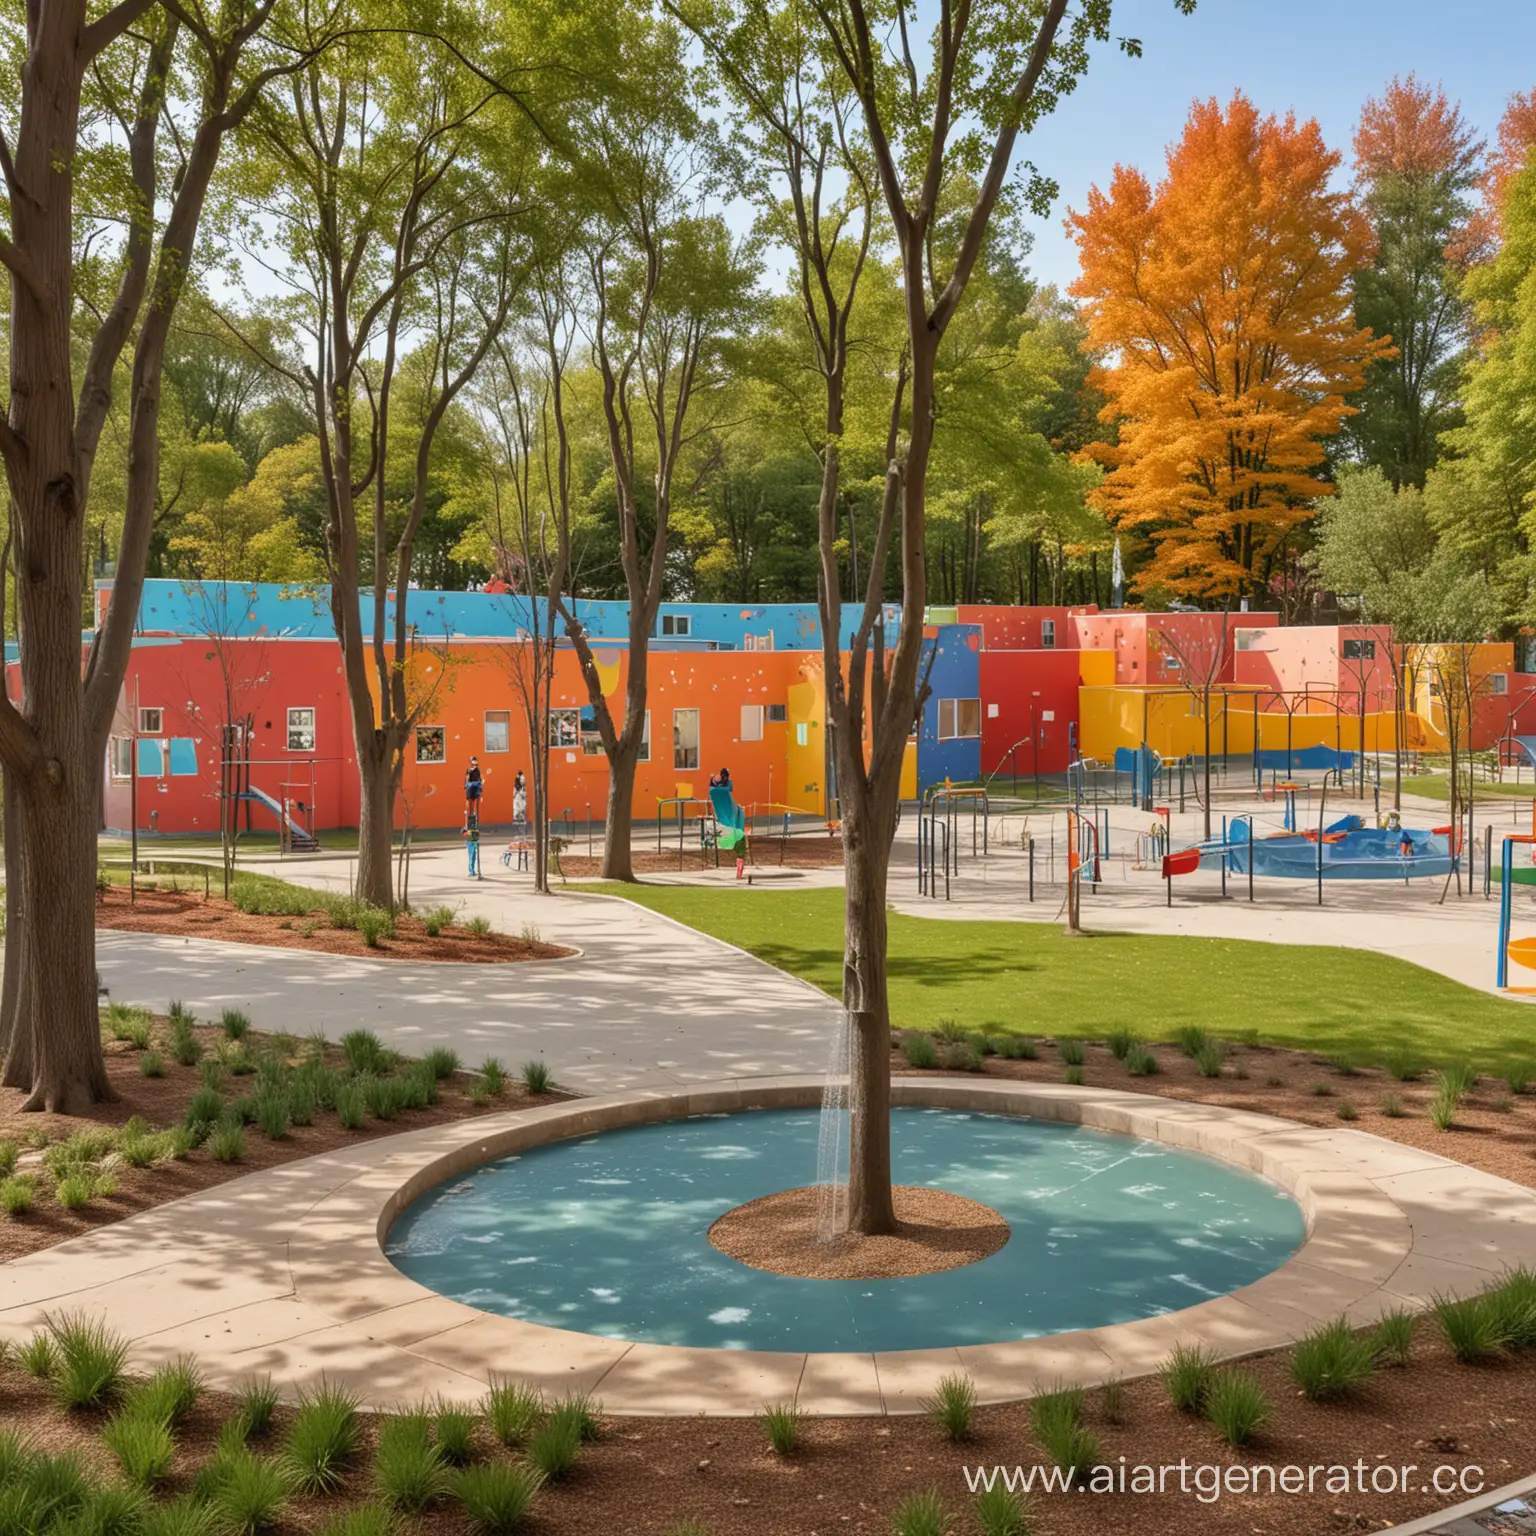 Vibrant-Kindergarten-Amidst-Lush-Woods-with-Playful-Art-and-Ample-Play-Spaces